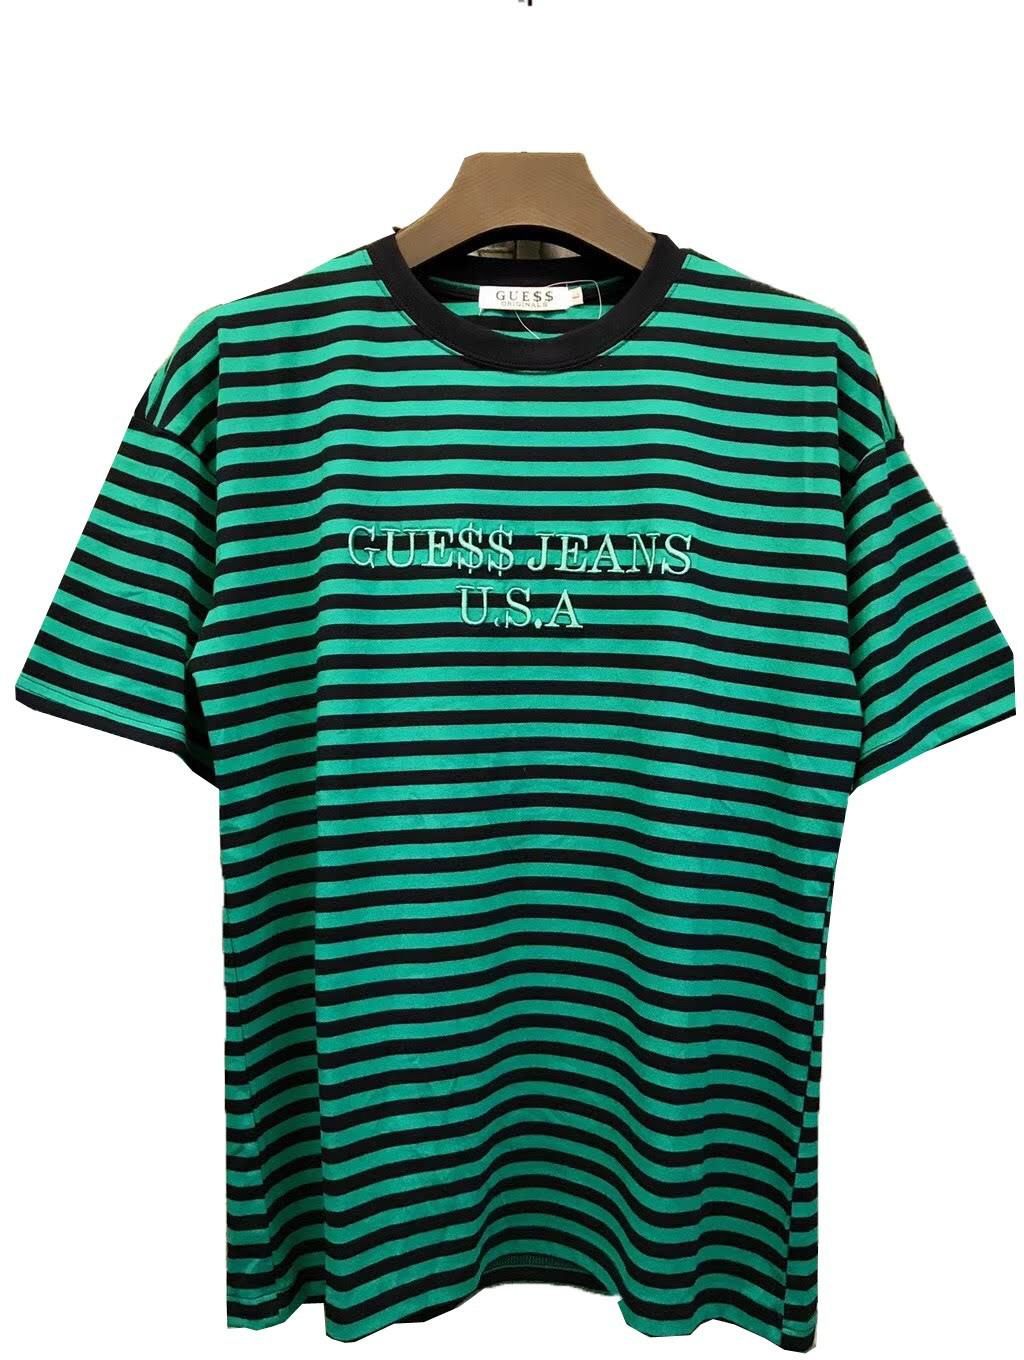 Guess Shirt Roblox | Free Robux Codes 2019 March 10 Day Light